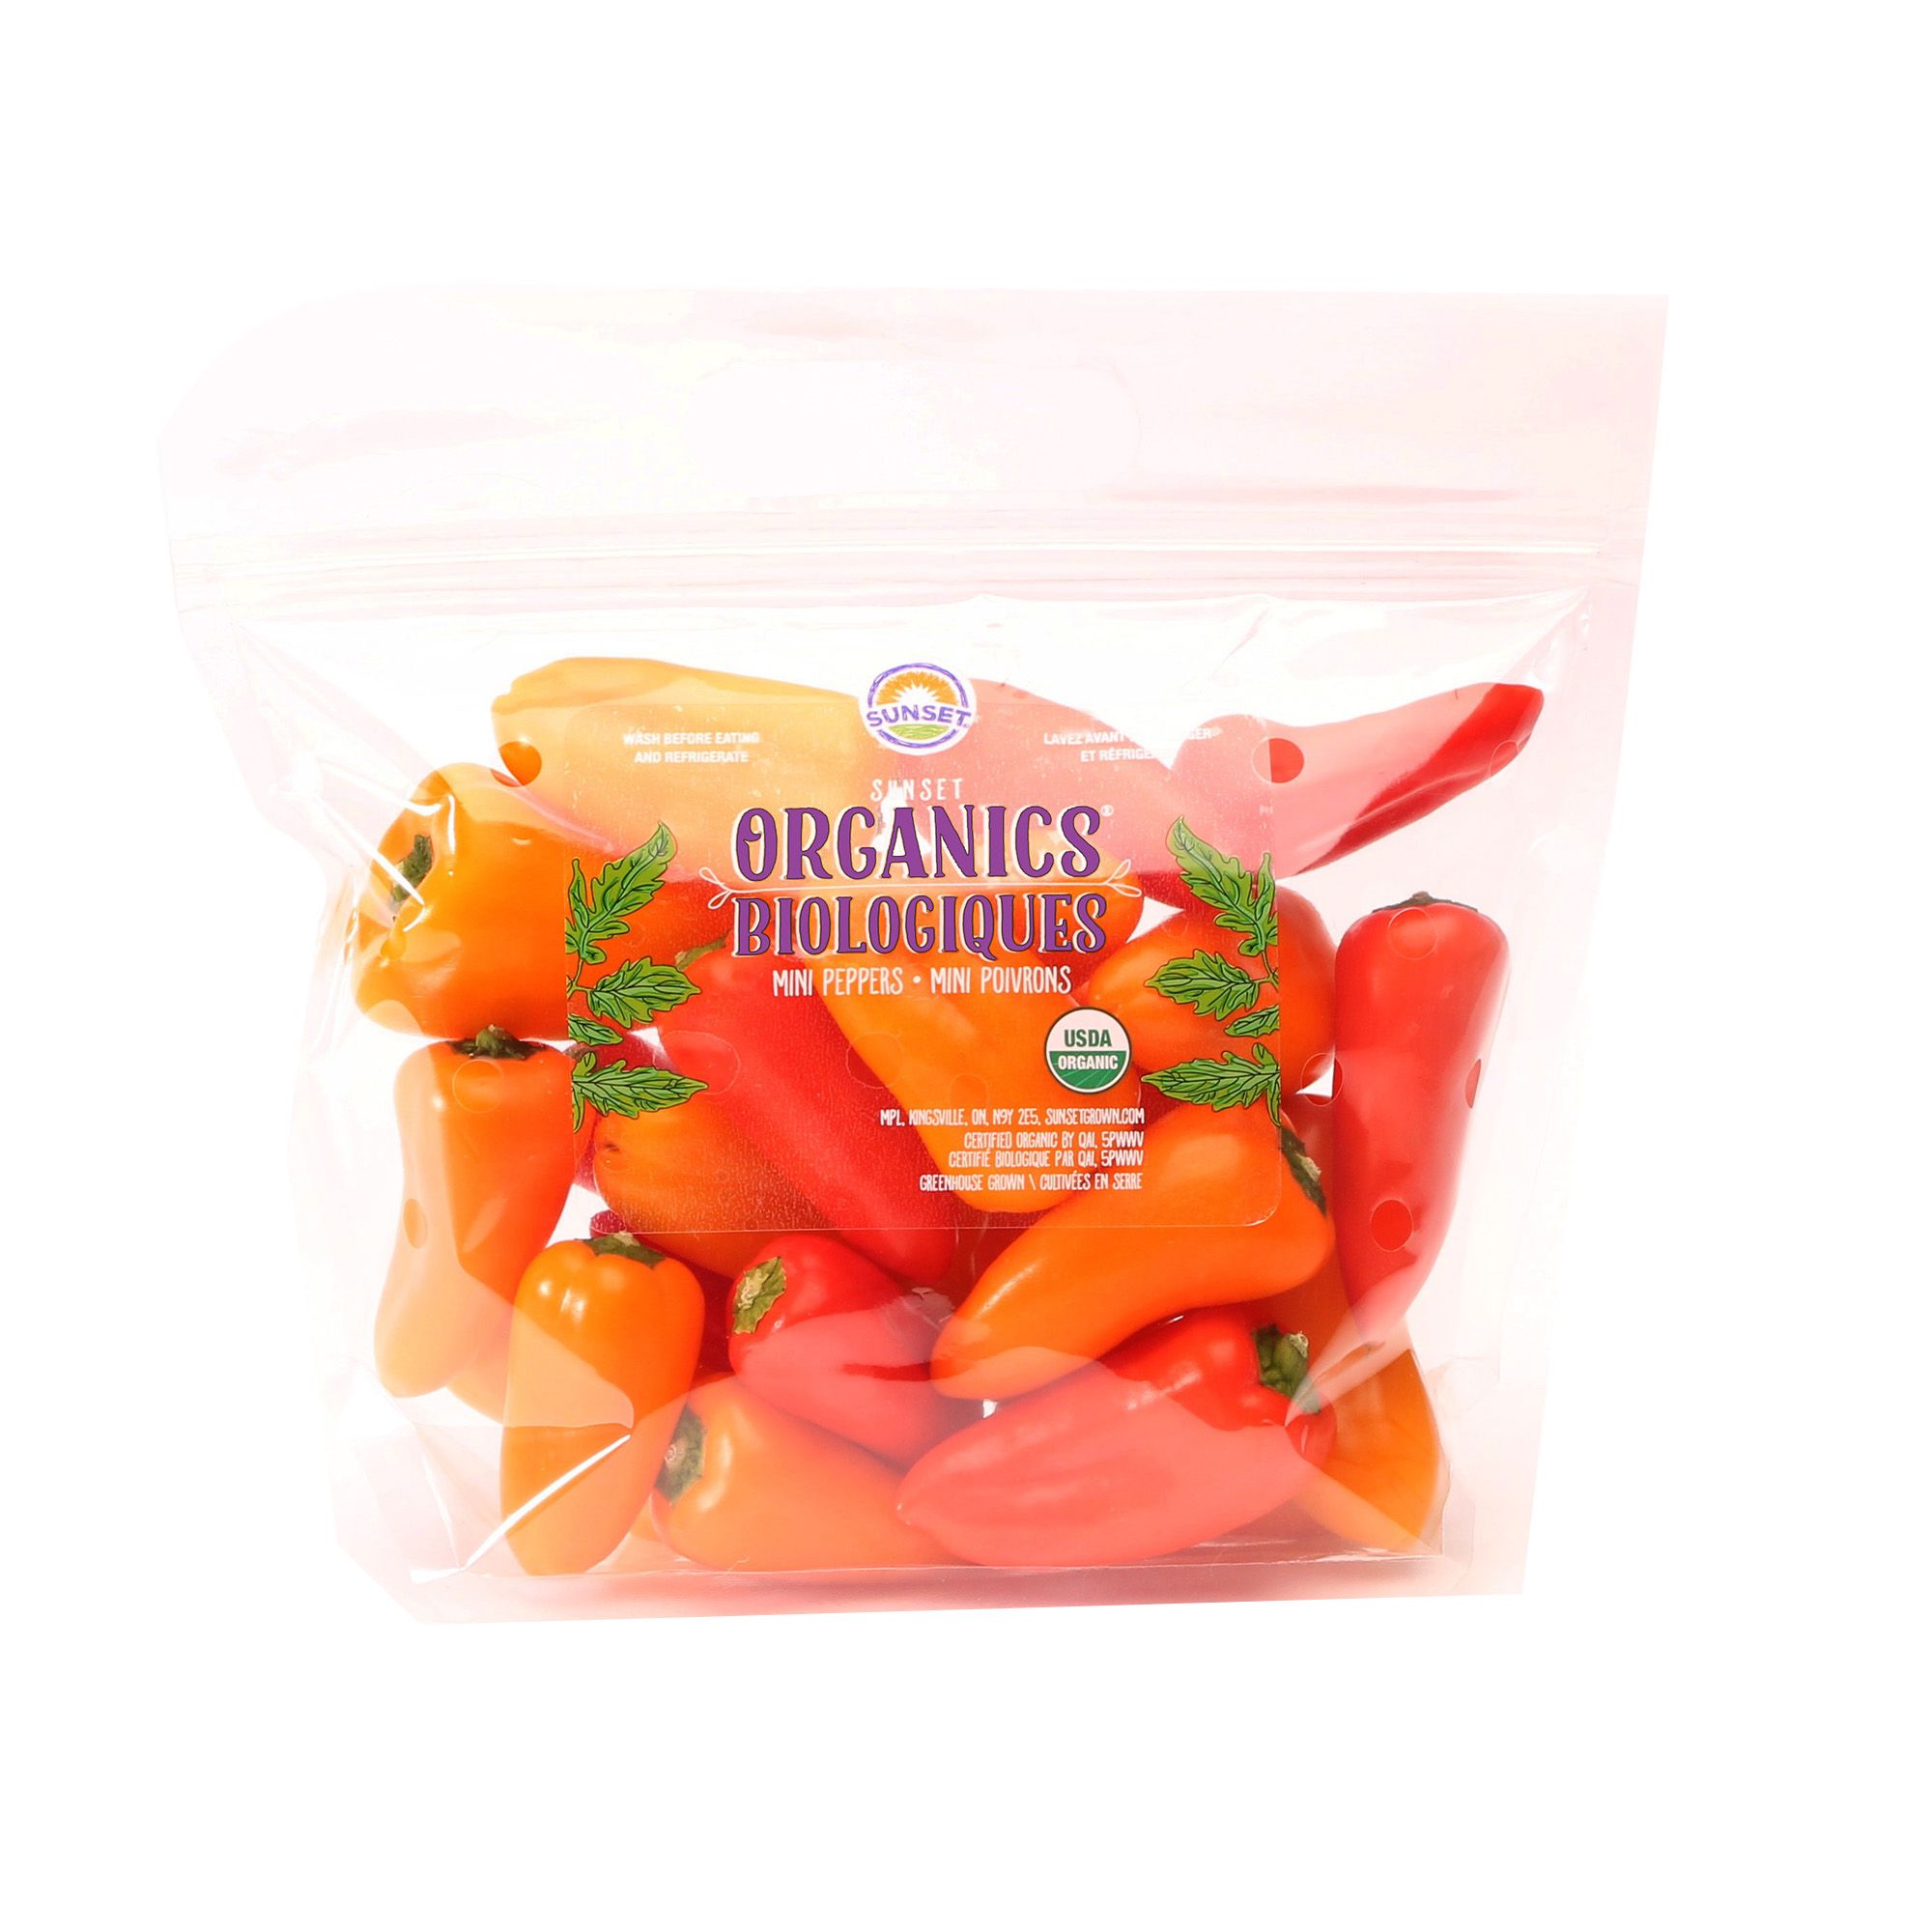 Fresh Bell Peppers Wholesale